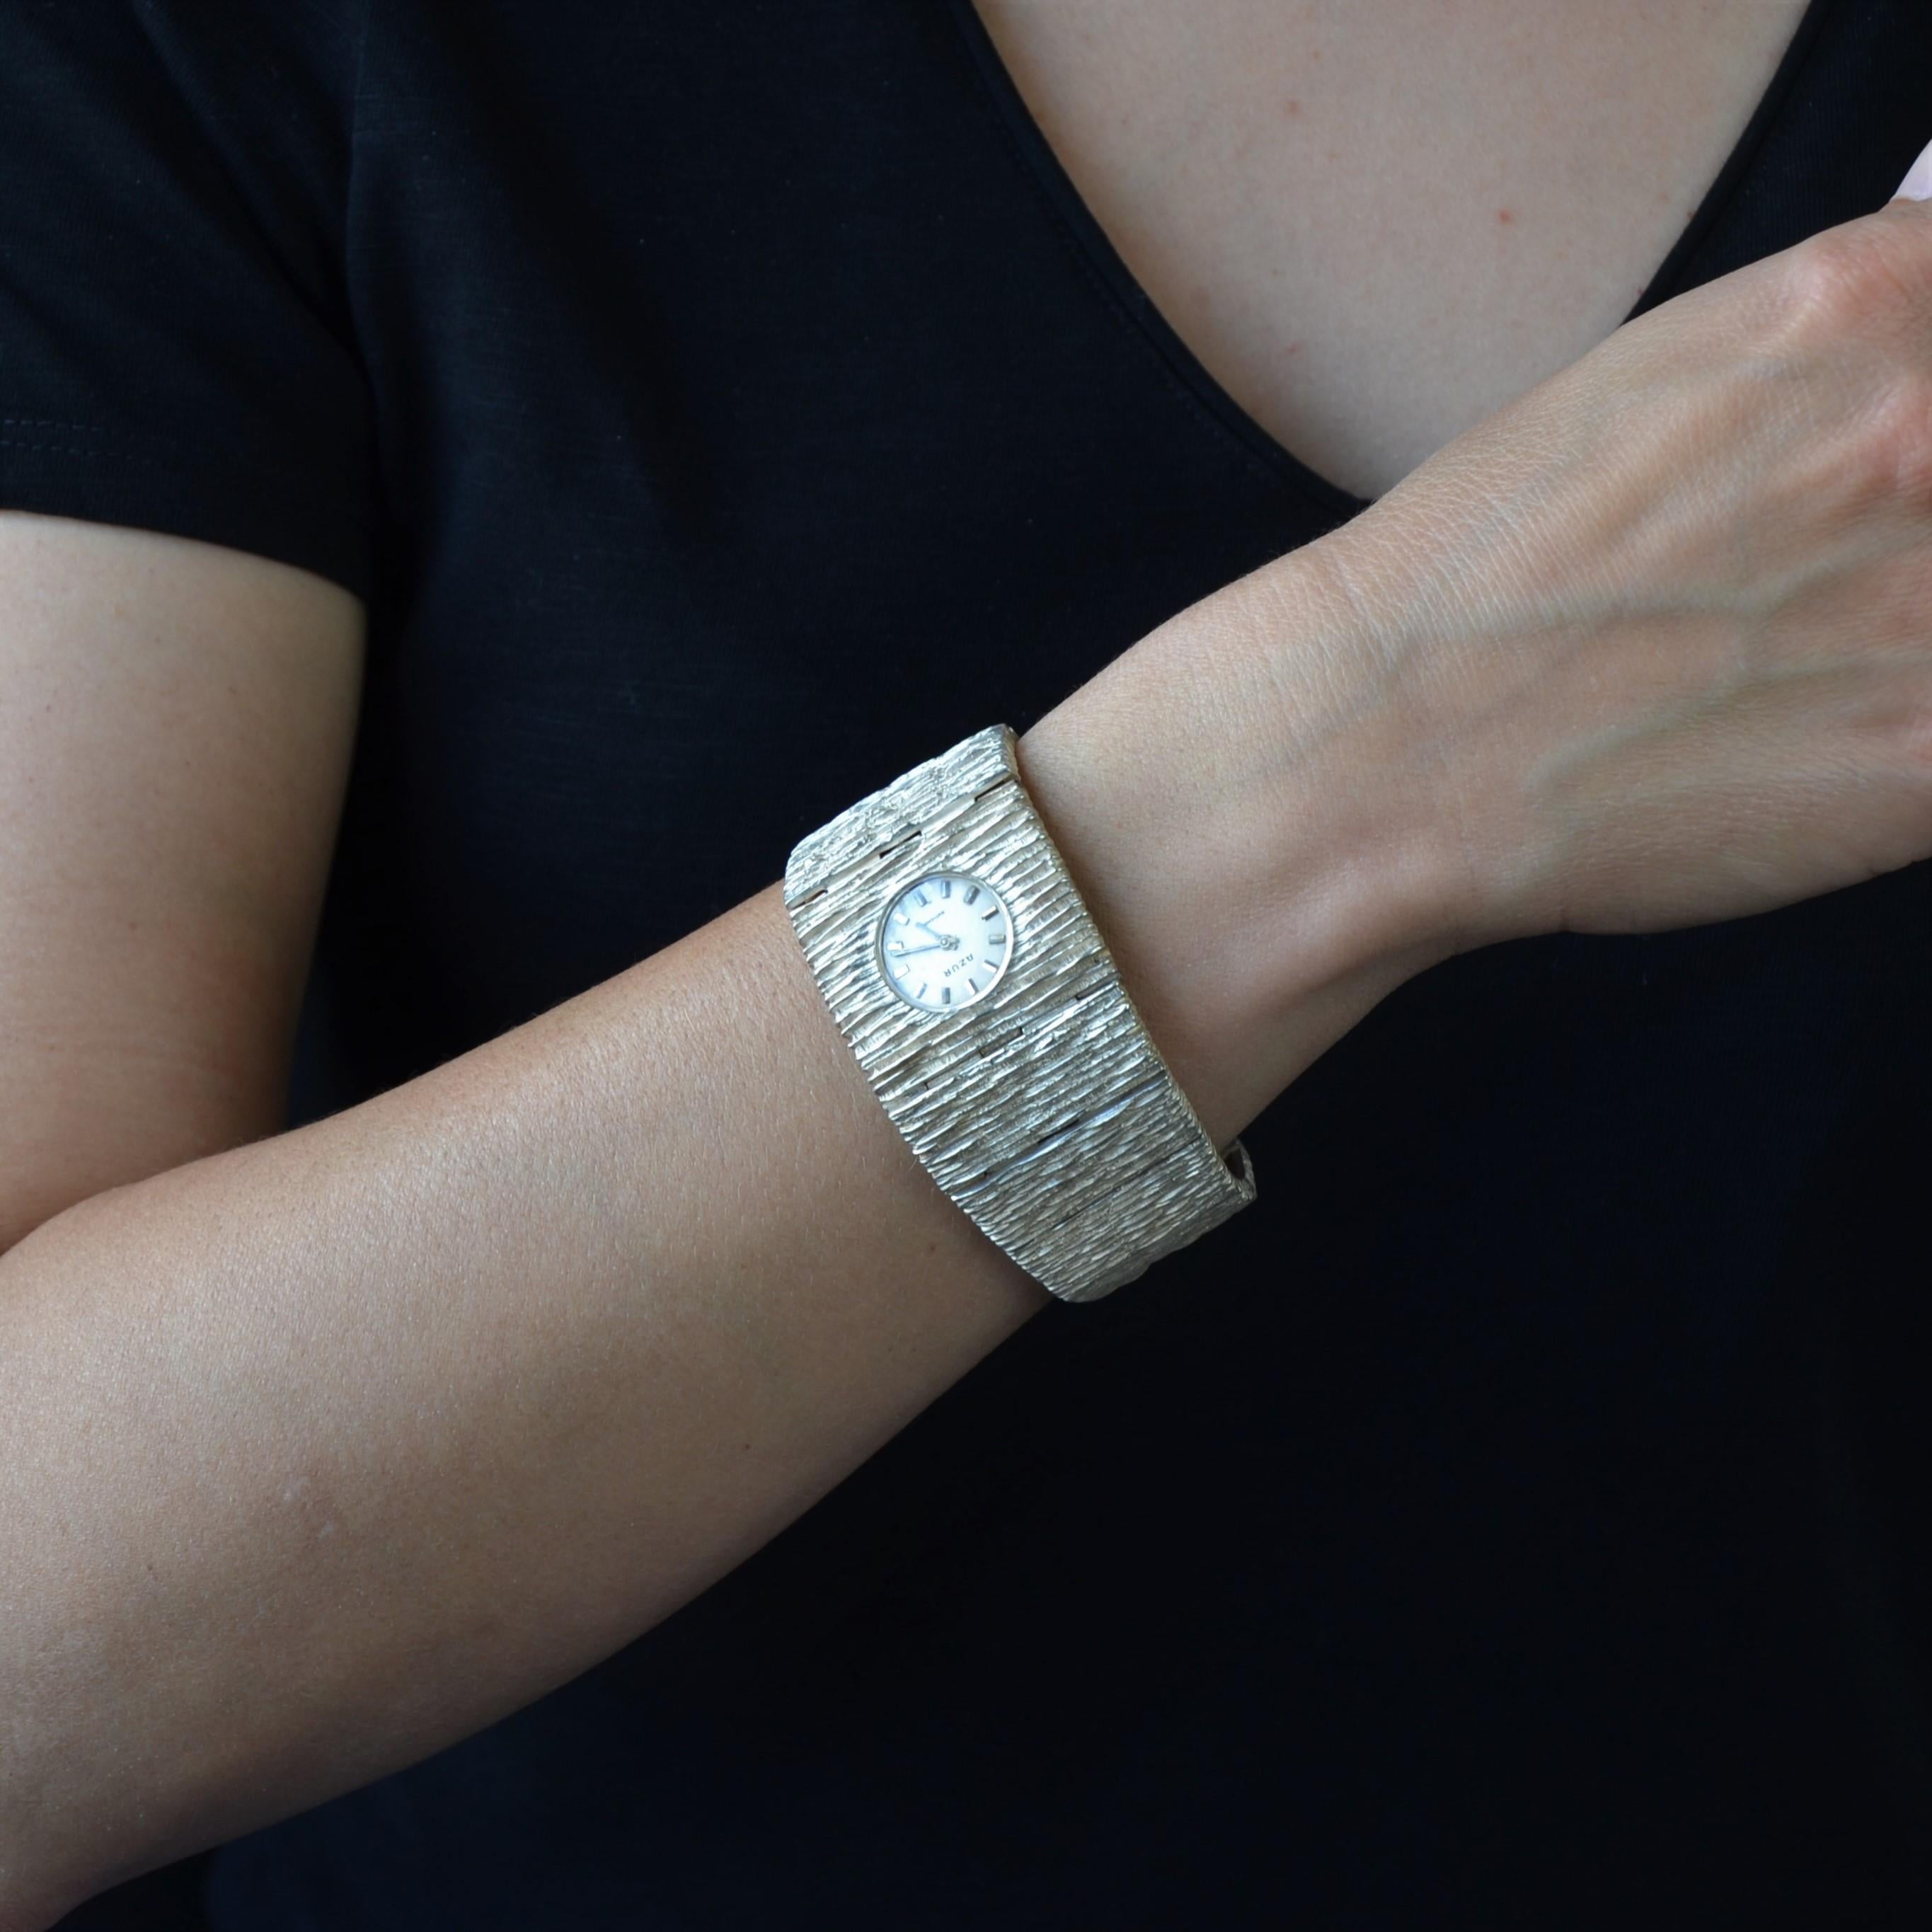 Watch in silver, swan hallmark.
Important and imposing retro watch in silver, it is formed of a wide bracelet in fall, with textured and amatized silver. The clasp is a scale.
The watch is round in shape, the light gray brushed back, marked 